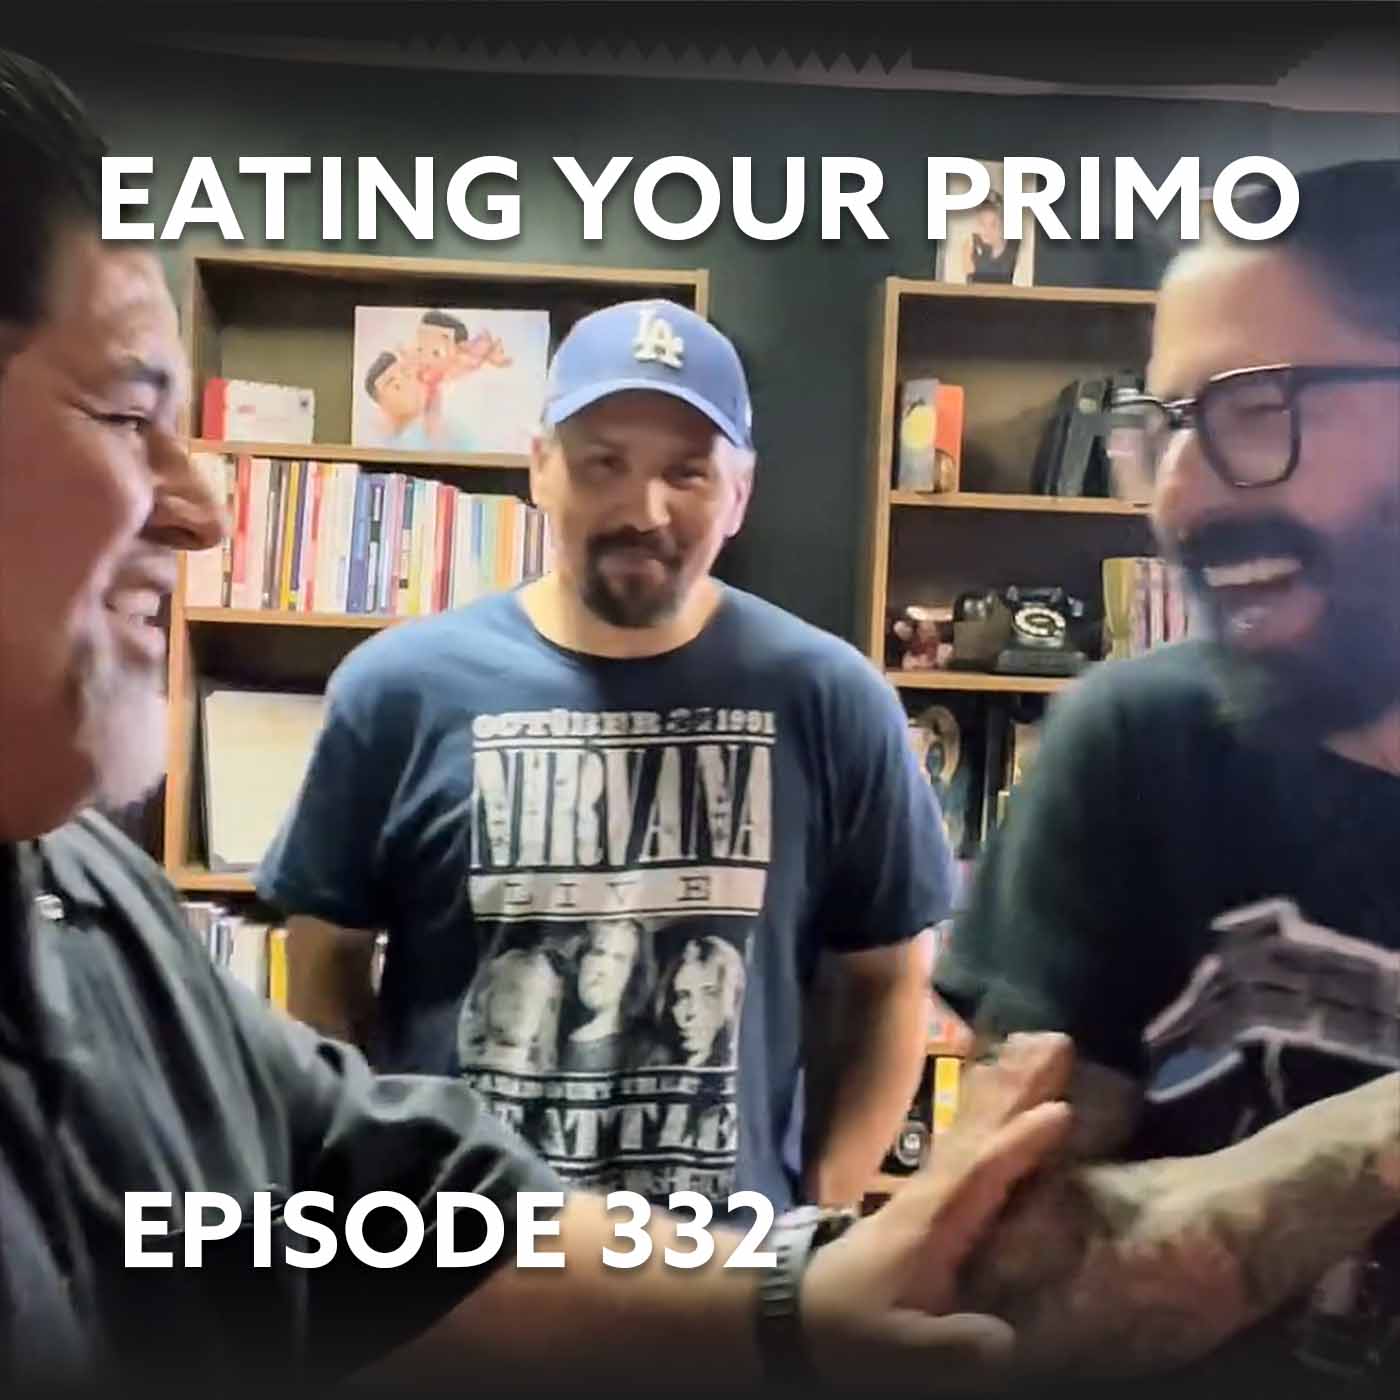 Episode 332 – Eating Your Primo